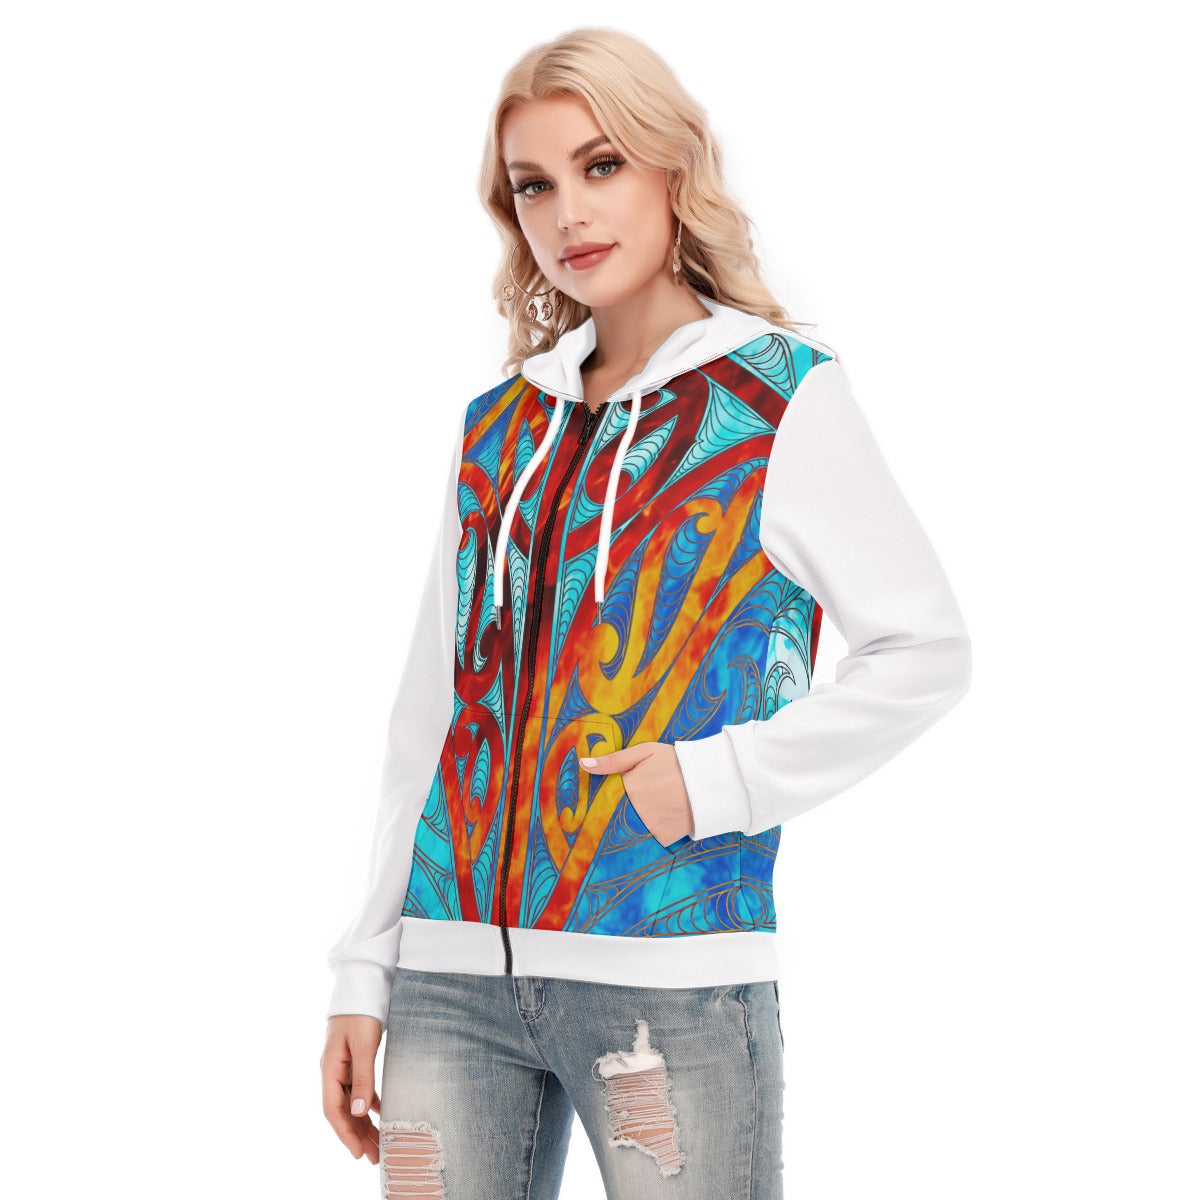 All-Over Print Women's Hoodie With Zipper